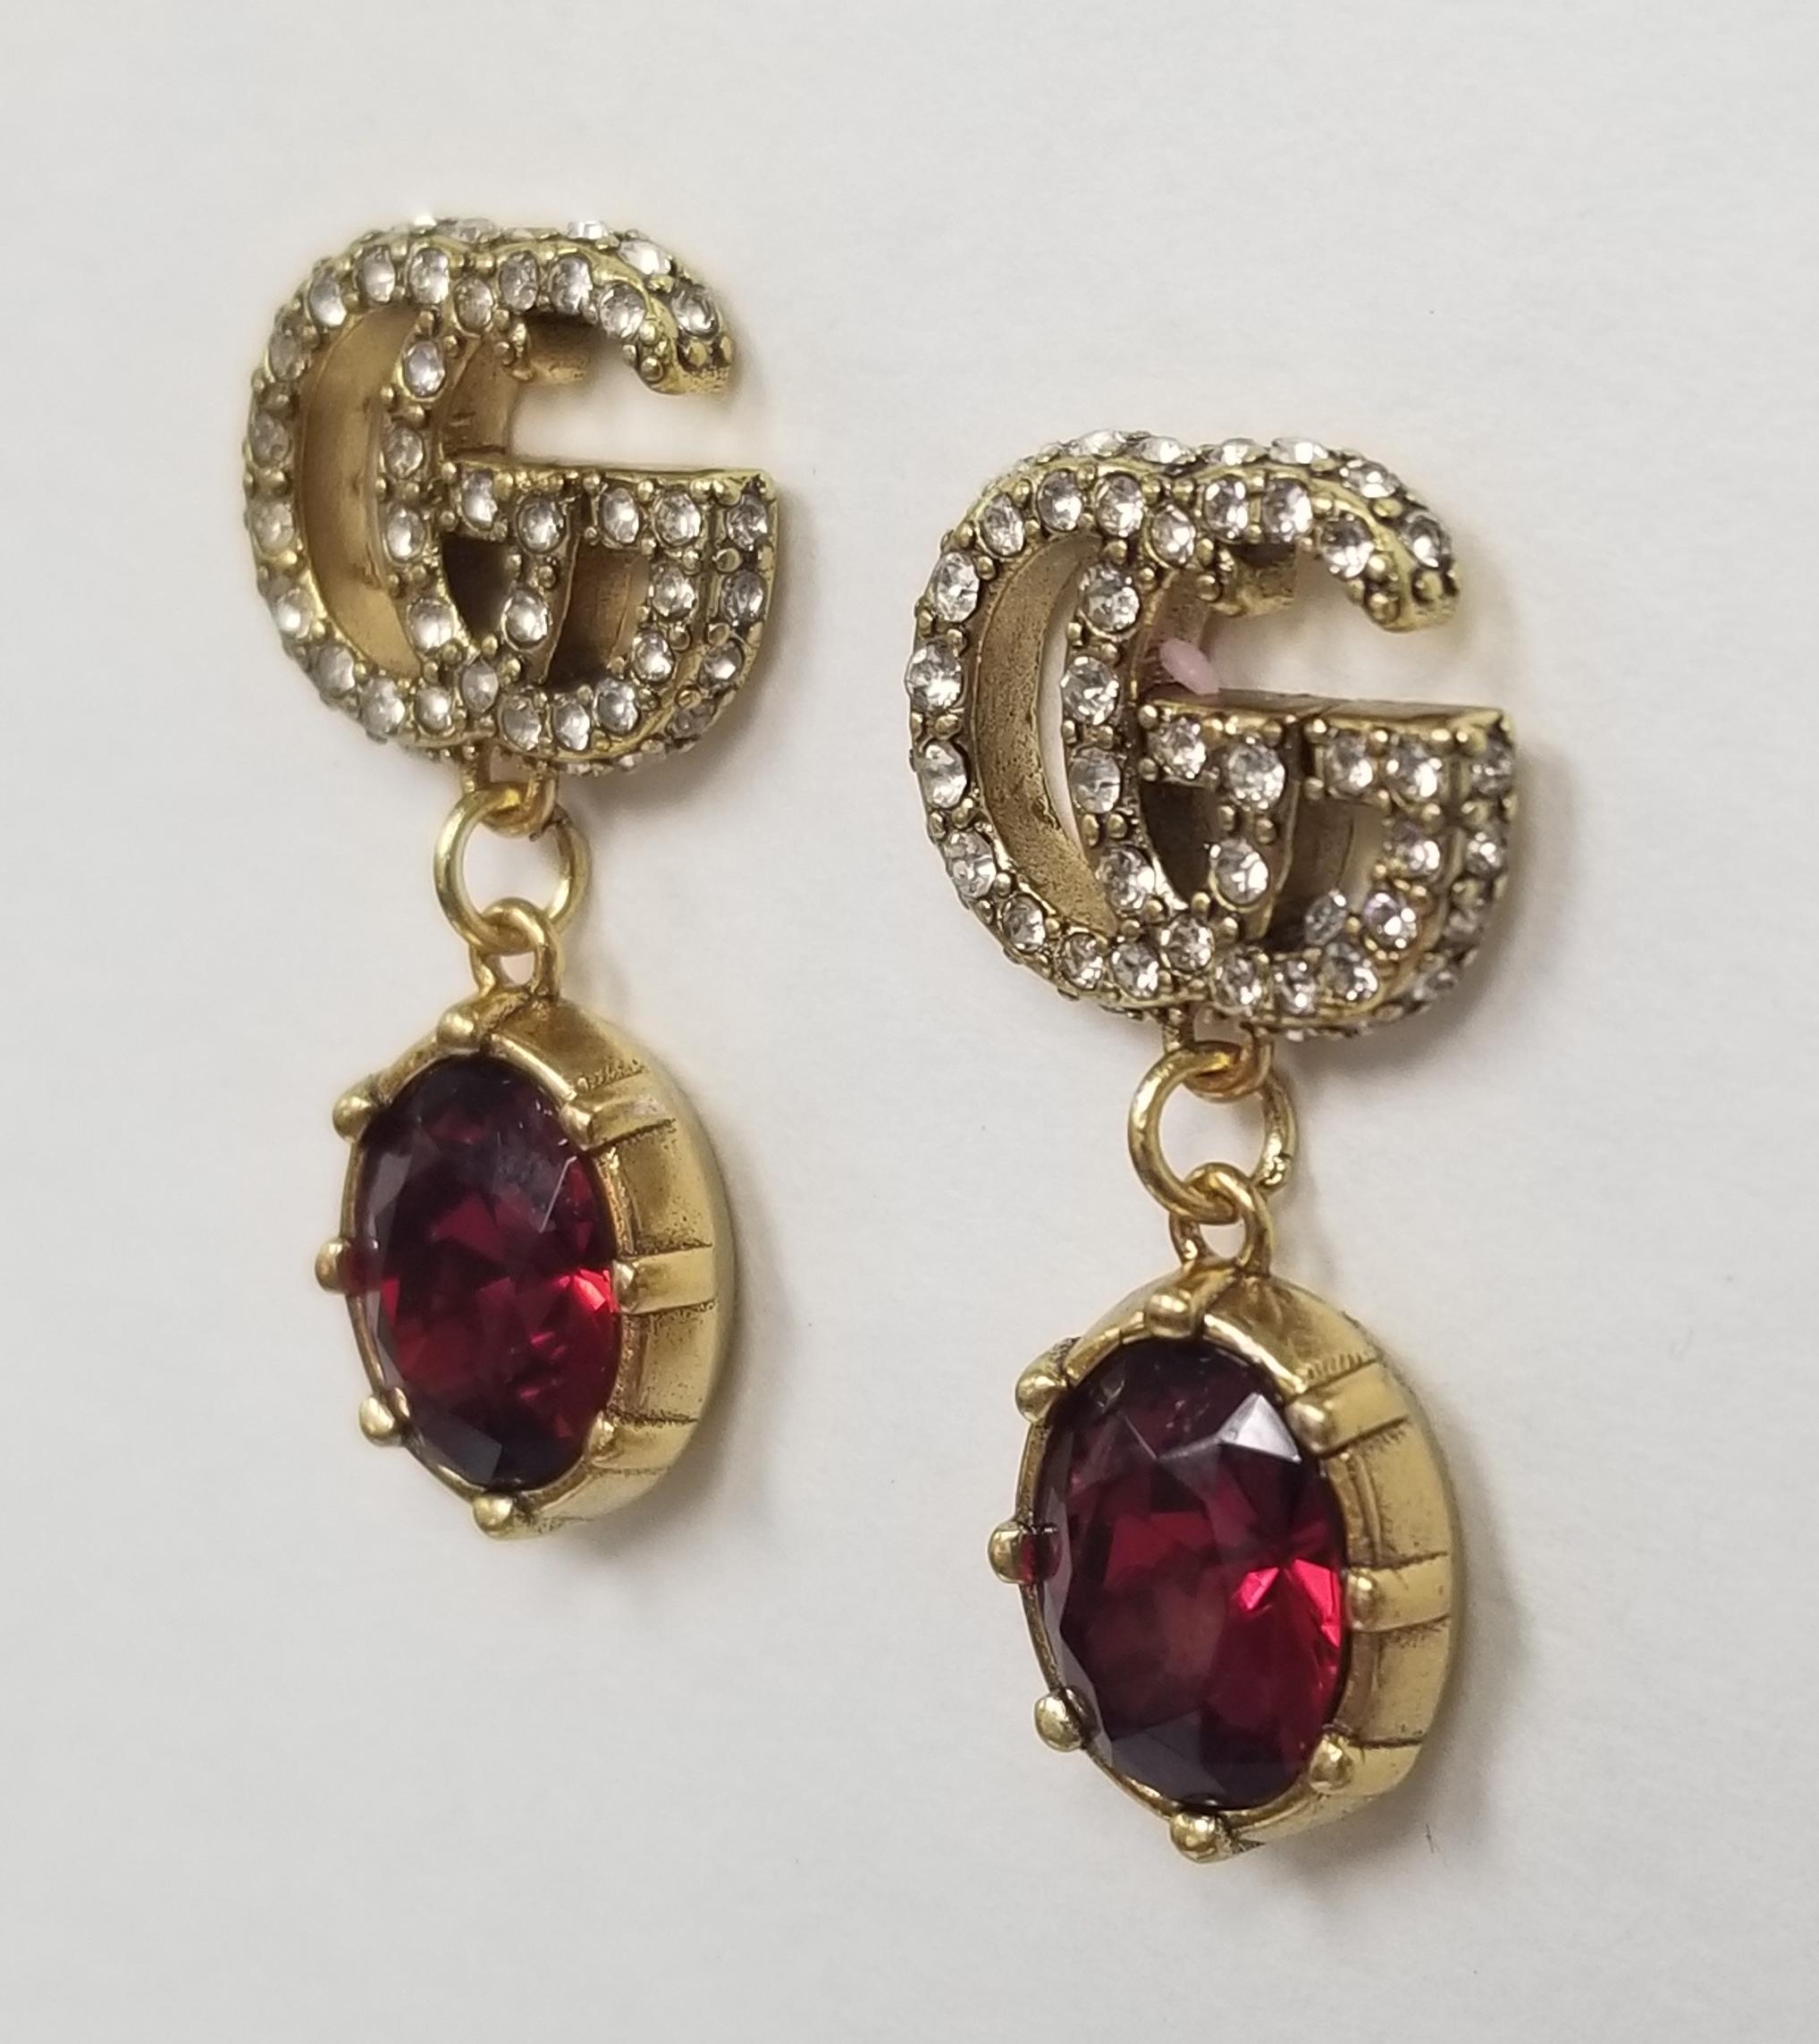  A red faceted crystal Earrings combines with the crystal Double G detail, forming a sparkling Earrings that completes these earrings in aged gold-toned metal.

    Metal with aged gold finish
    Crystal encrusted Double G detail
    Red crystal